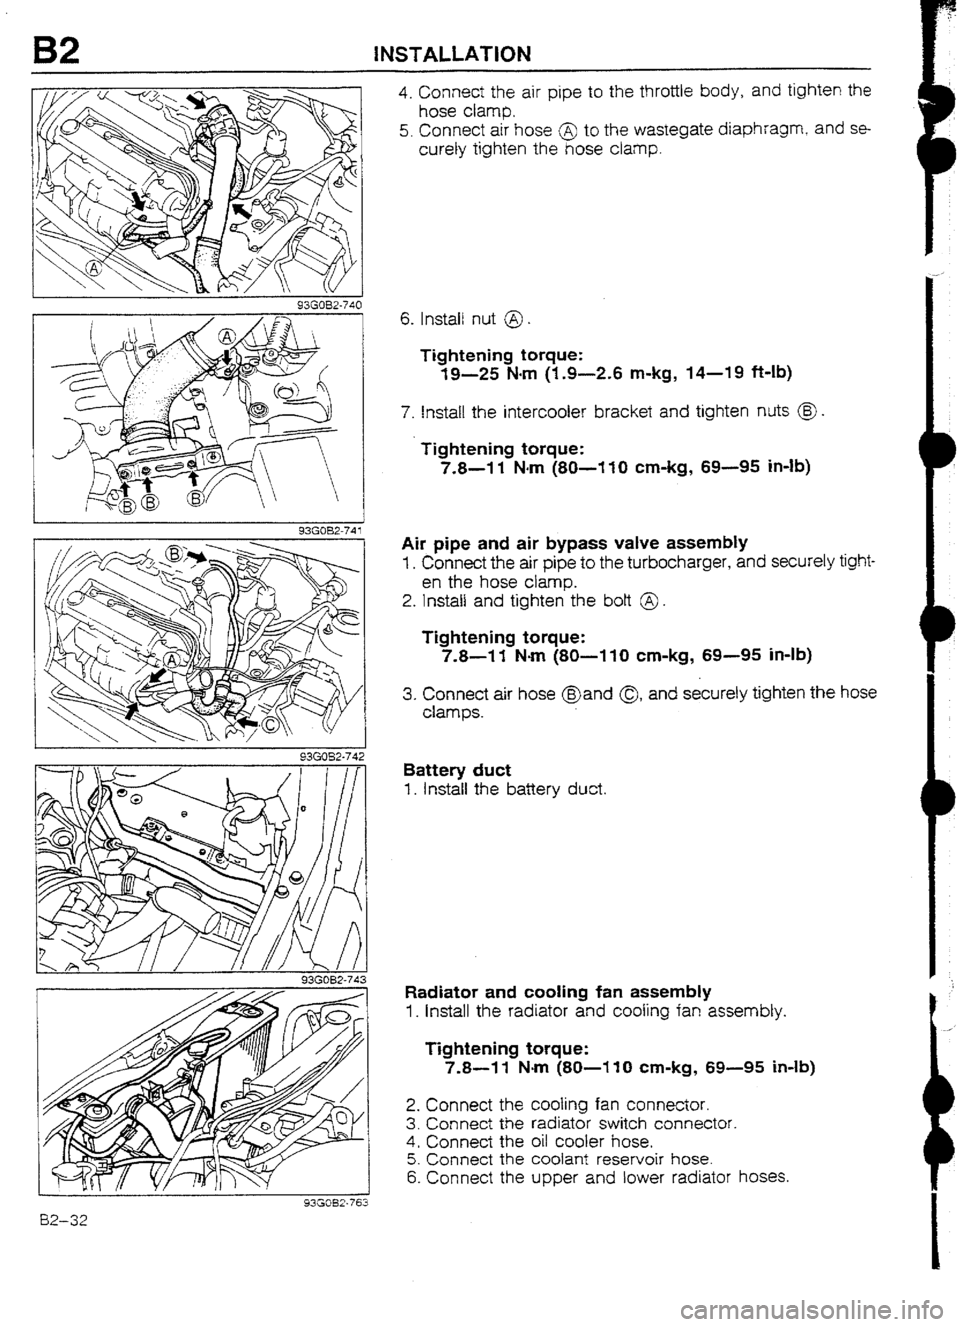 MAZDA 232 1990  Workshop Manual Suplement B2 INSTALLATION 
93GOB2-74 1 
93GOB2-743 
82-32 
4. Connect the air pipe to the throttle body, and tighten the 
hose clamp. 
5. Connect air hose @ to the wastegate diaphragm, 
and se- 
curely tighten 